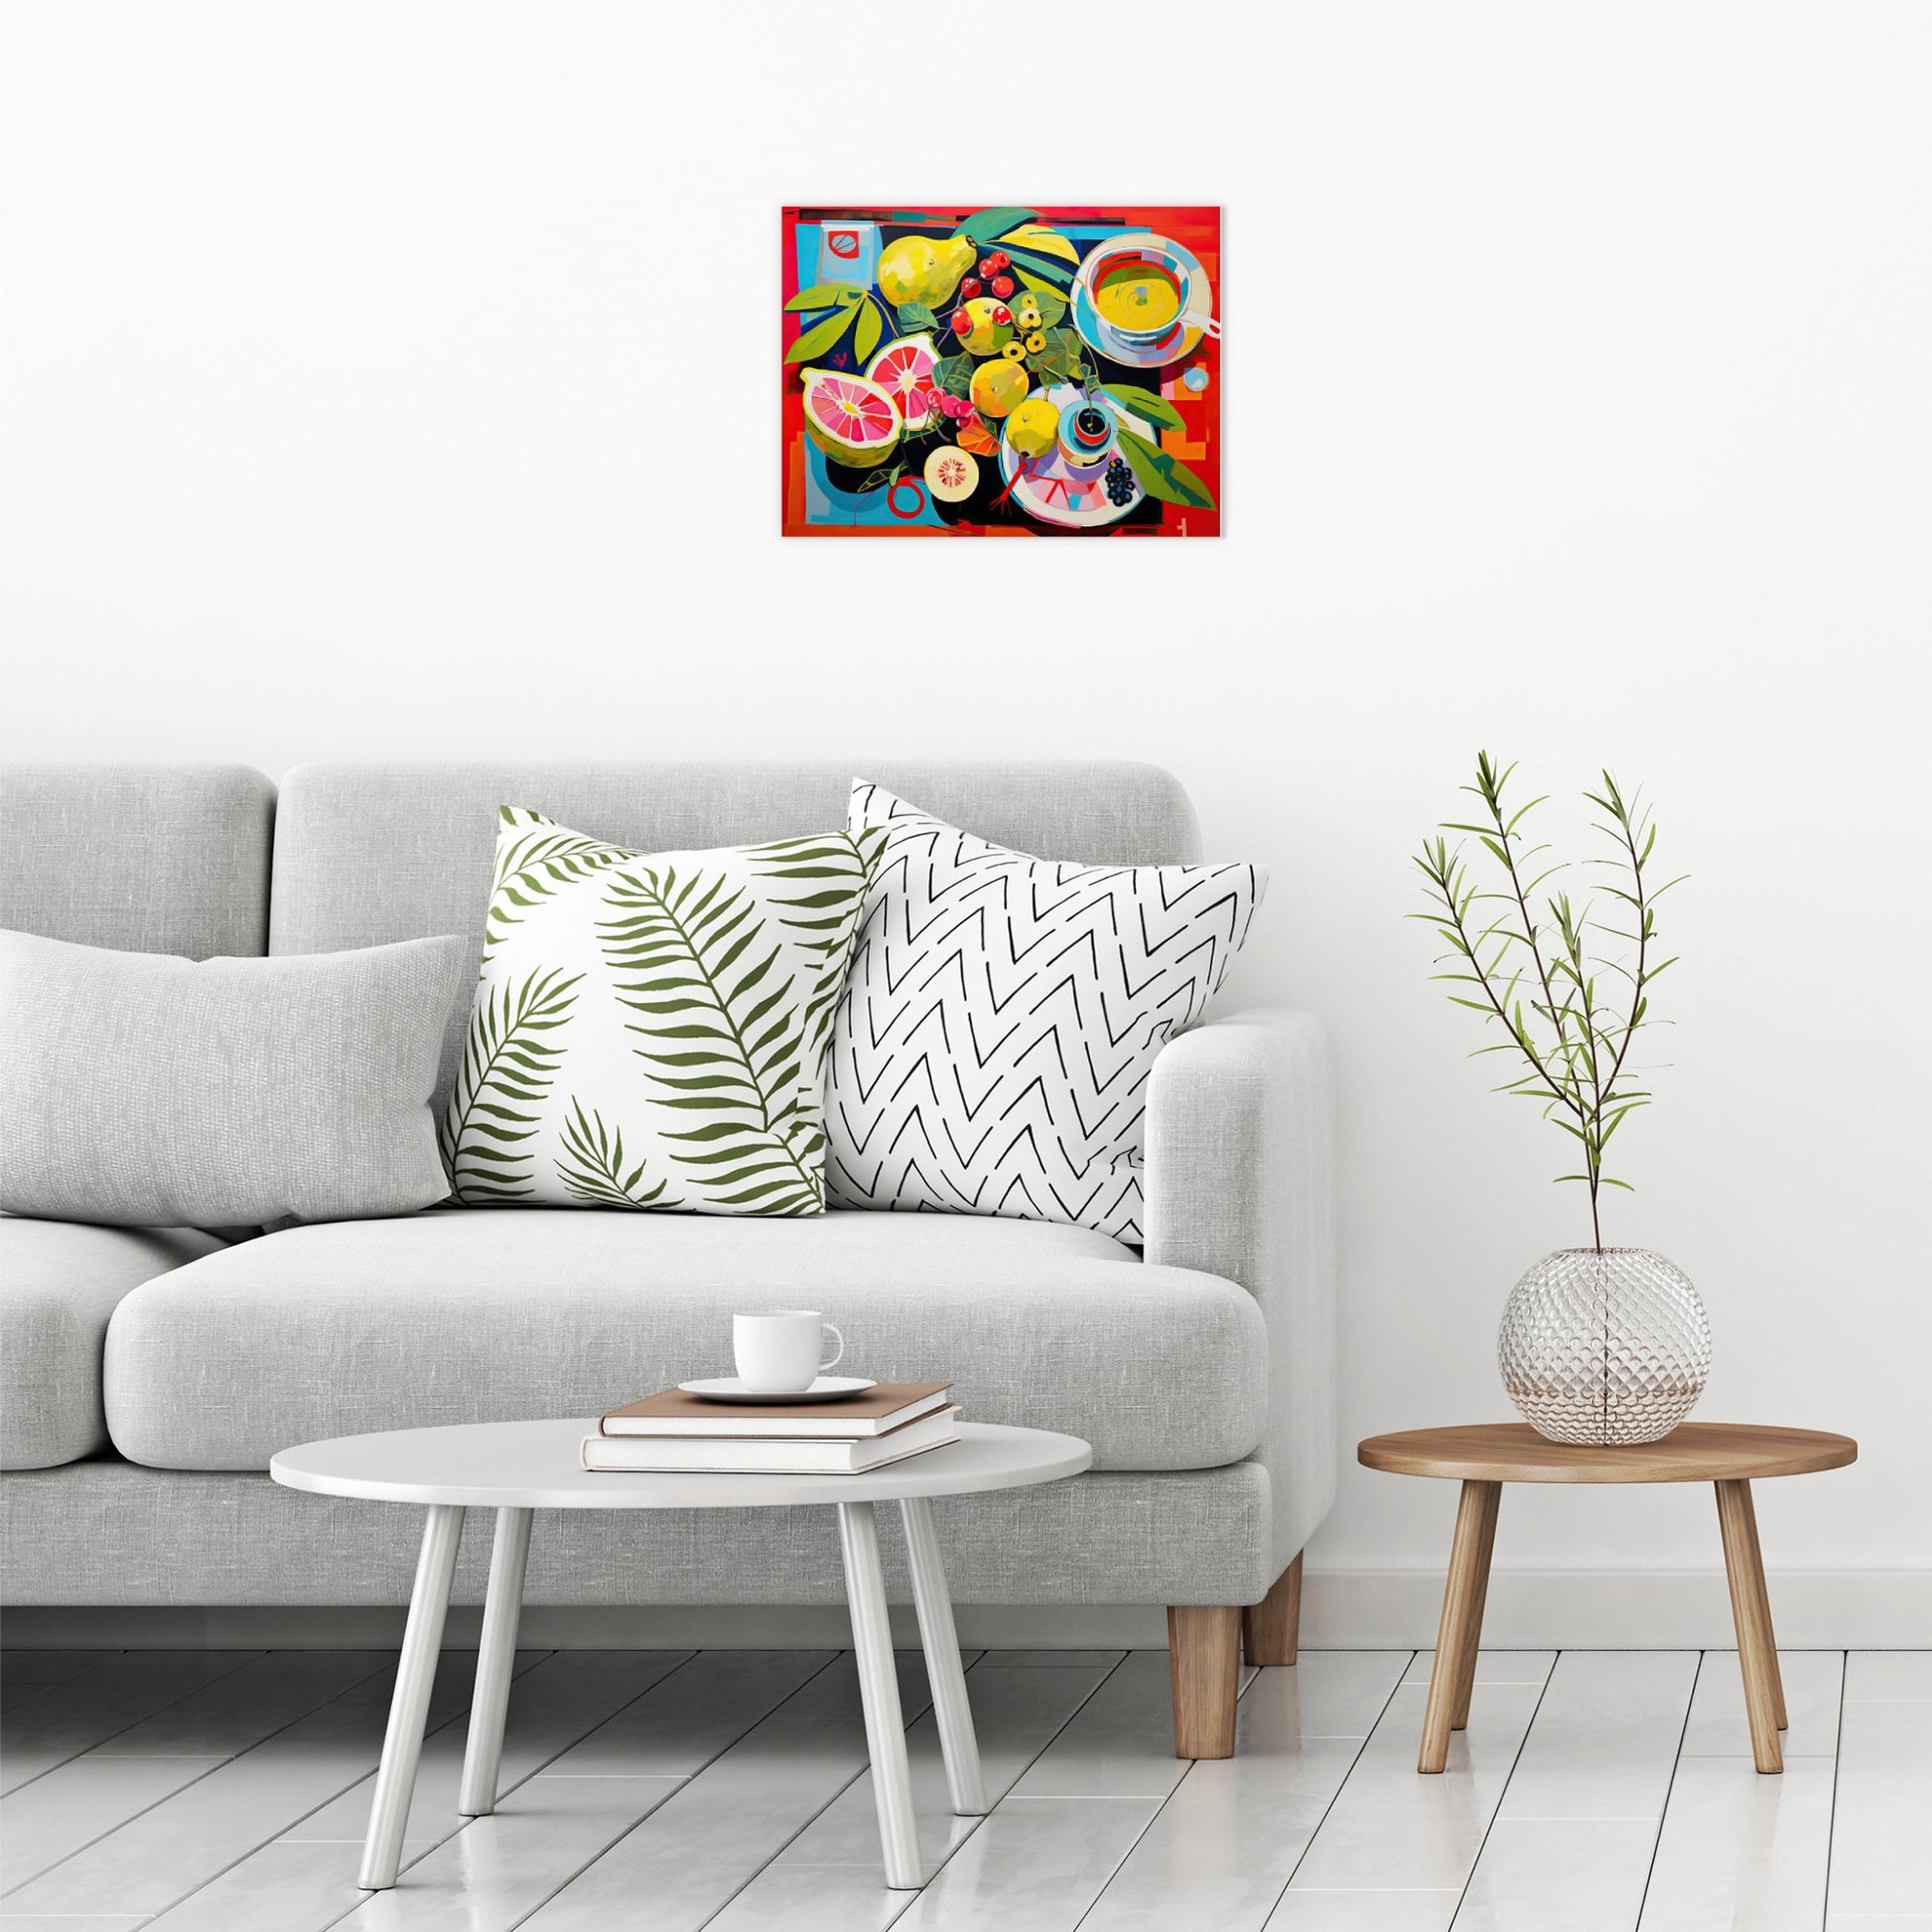 A contemporary modern room view showing a medium size metal art poster display plate with printed design of a Still Life with Fruit Painting